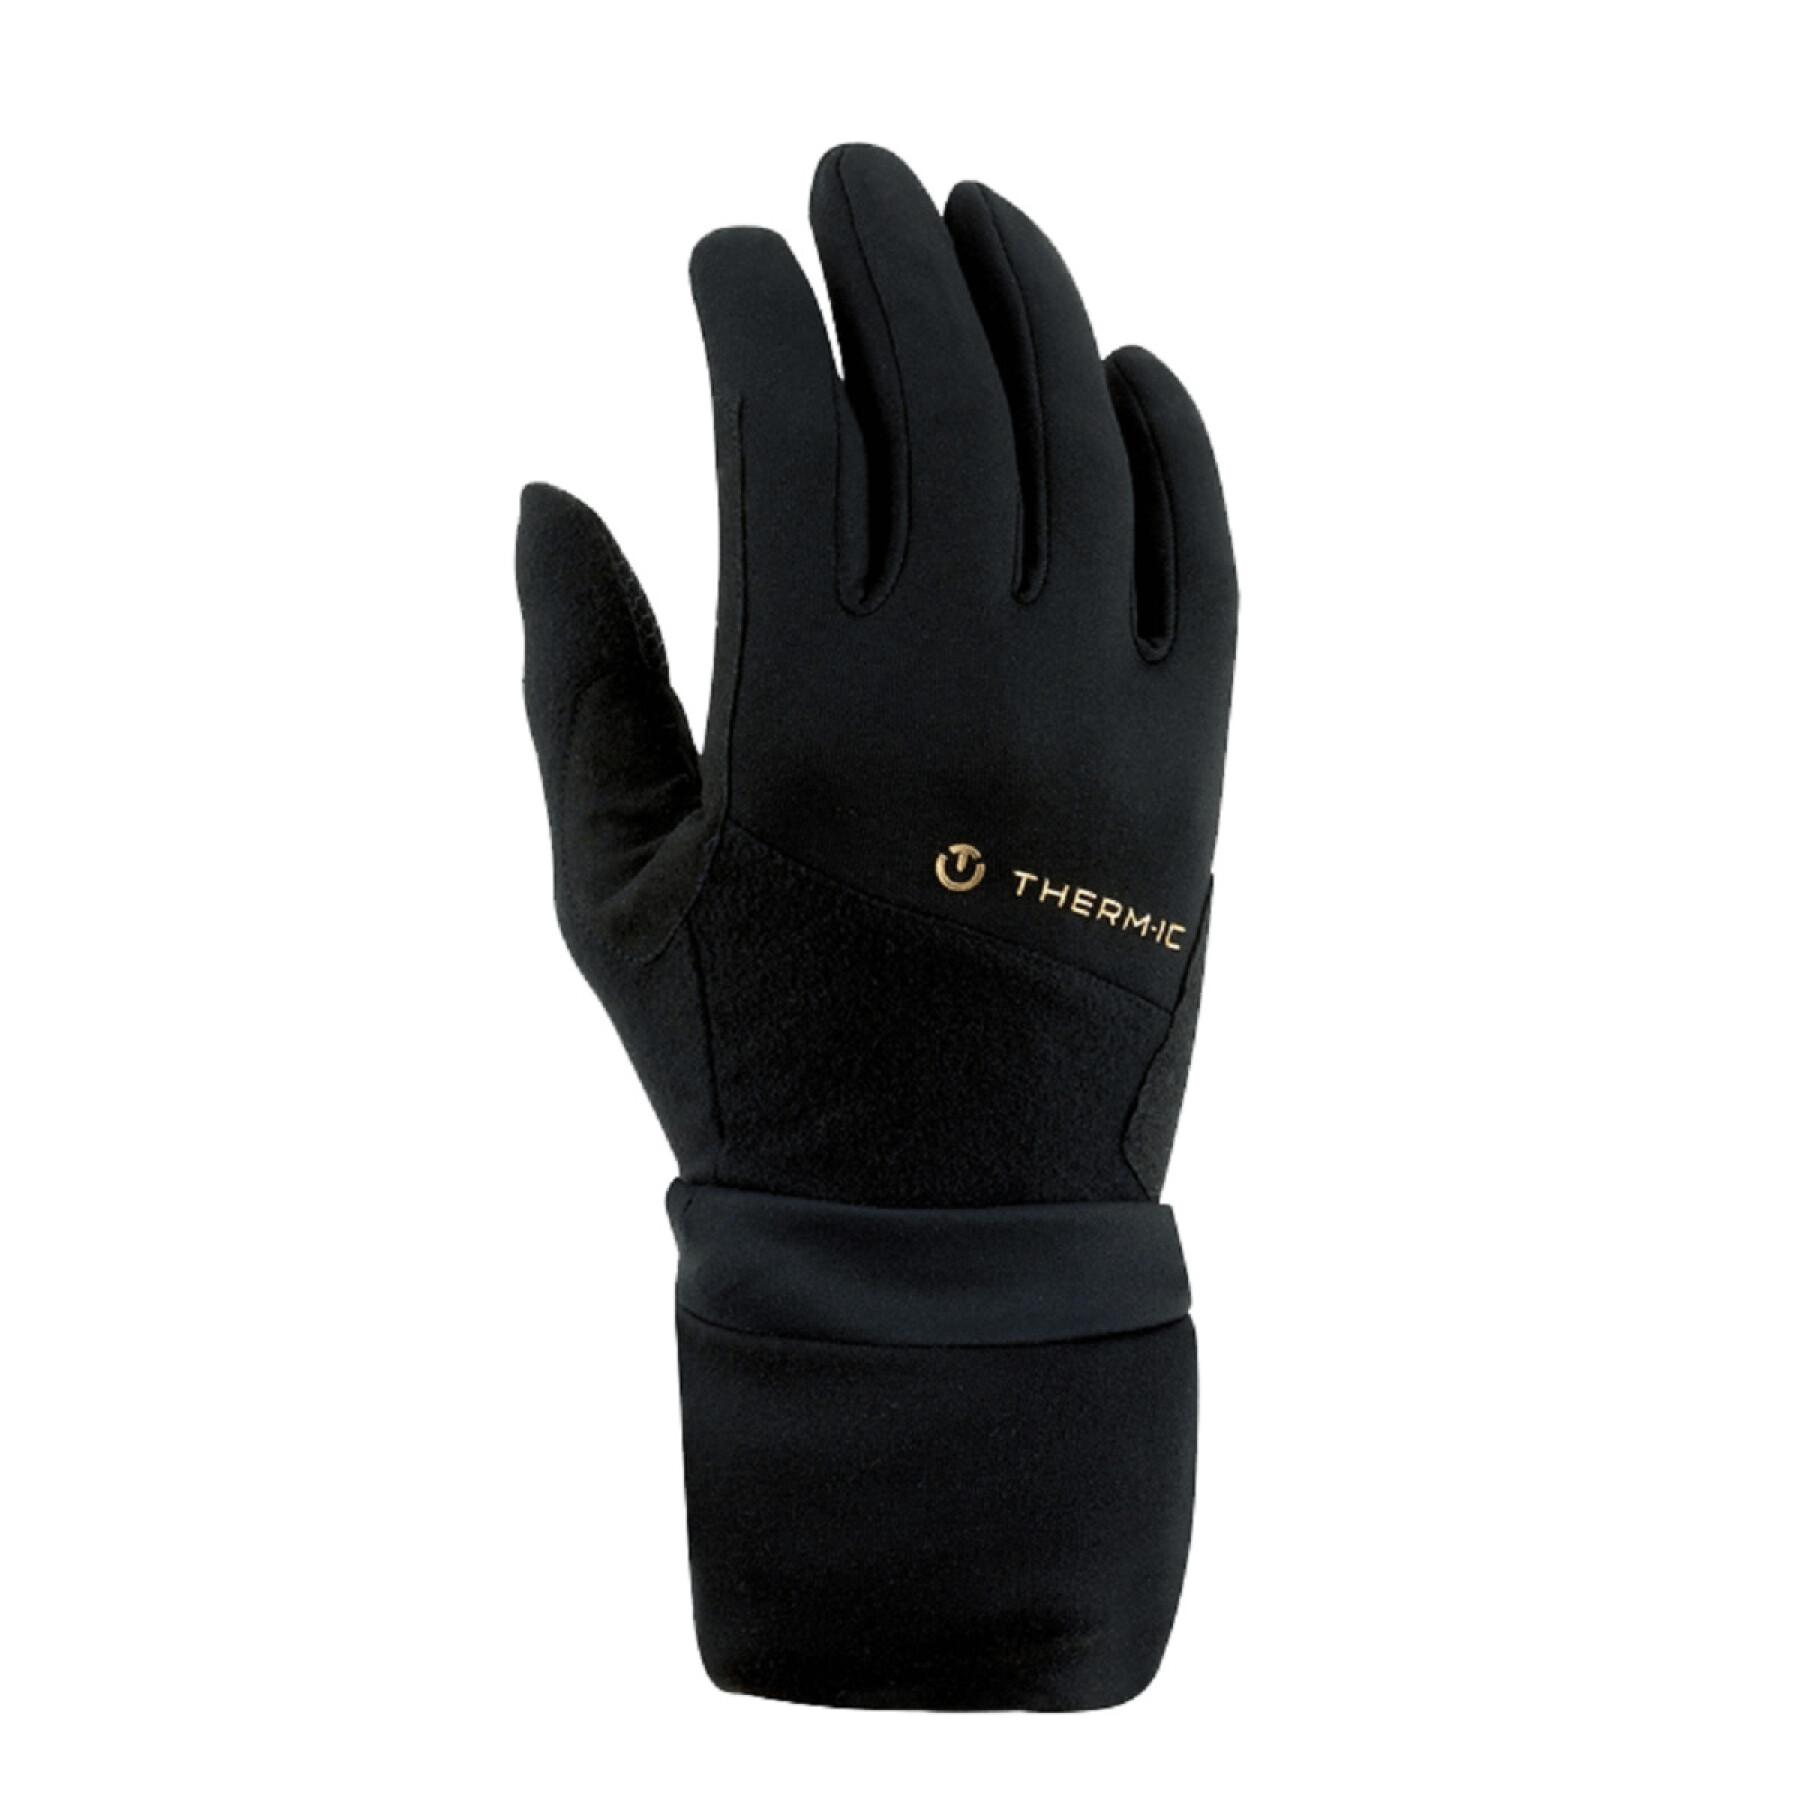 Gloves convertible into mittens Therm-Ic